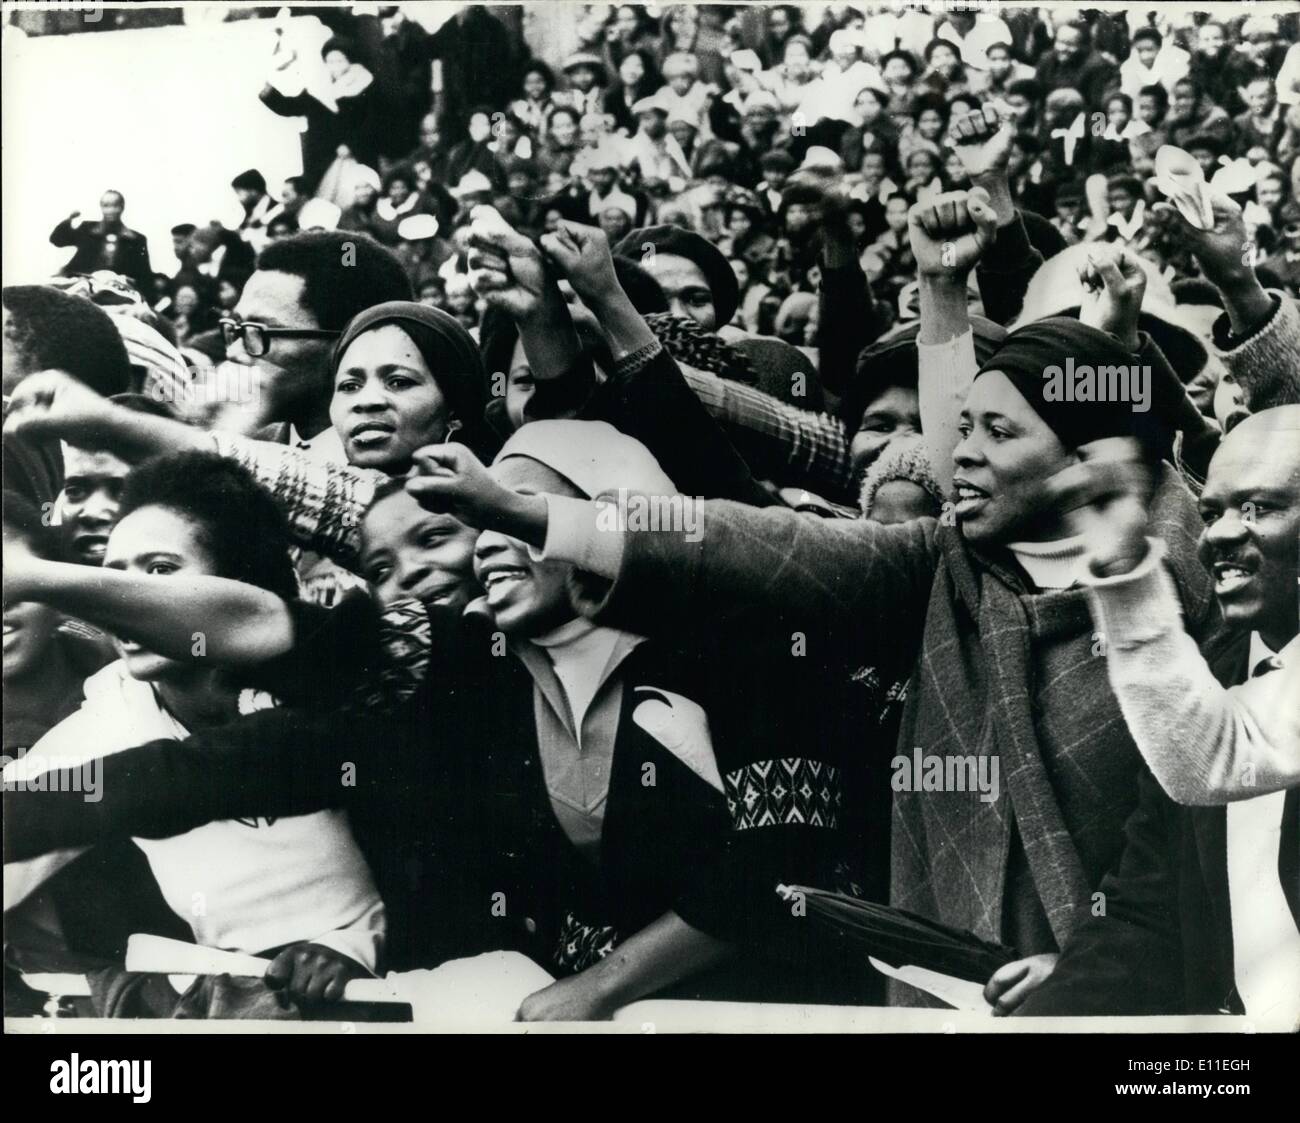 Sep. 09, 1977 - 20,00 attended funeral of Black Leader Steve Biko: An estimated 20,000 people attended the Sports Stadium funeral of 30 year old Steve Biko, the black leader who died a fortnight ago in a police cell in Pretoria. It took place in King William's Town, South Africa. Speakers at the five hour service belief that Biko died violently. Photo shows Changing Black women giving the black power salute during the service for Black leader Steve Biko in the Sport Statium at King William's Town, South Africa, last Sunday. Stock Photo